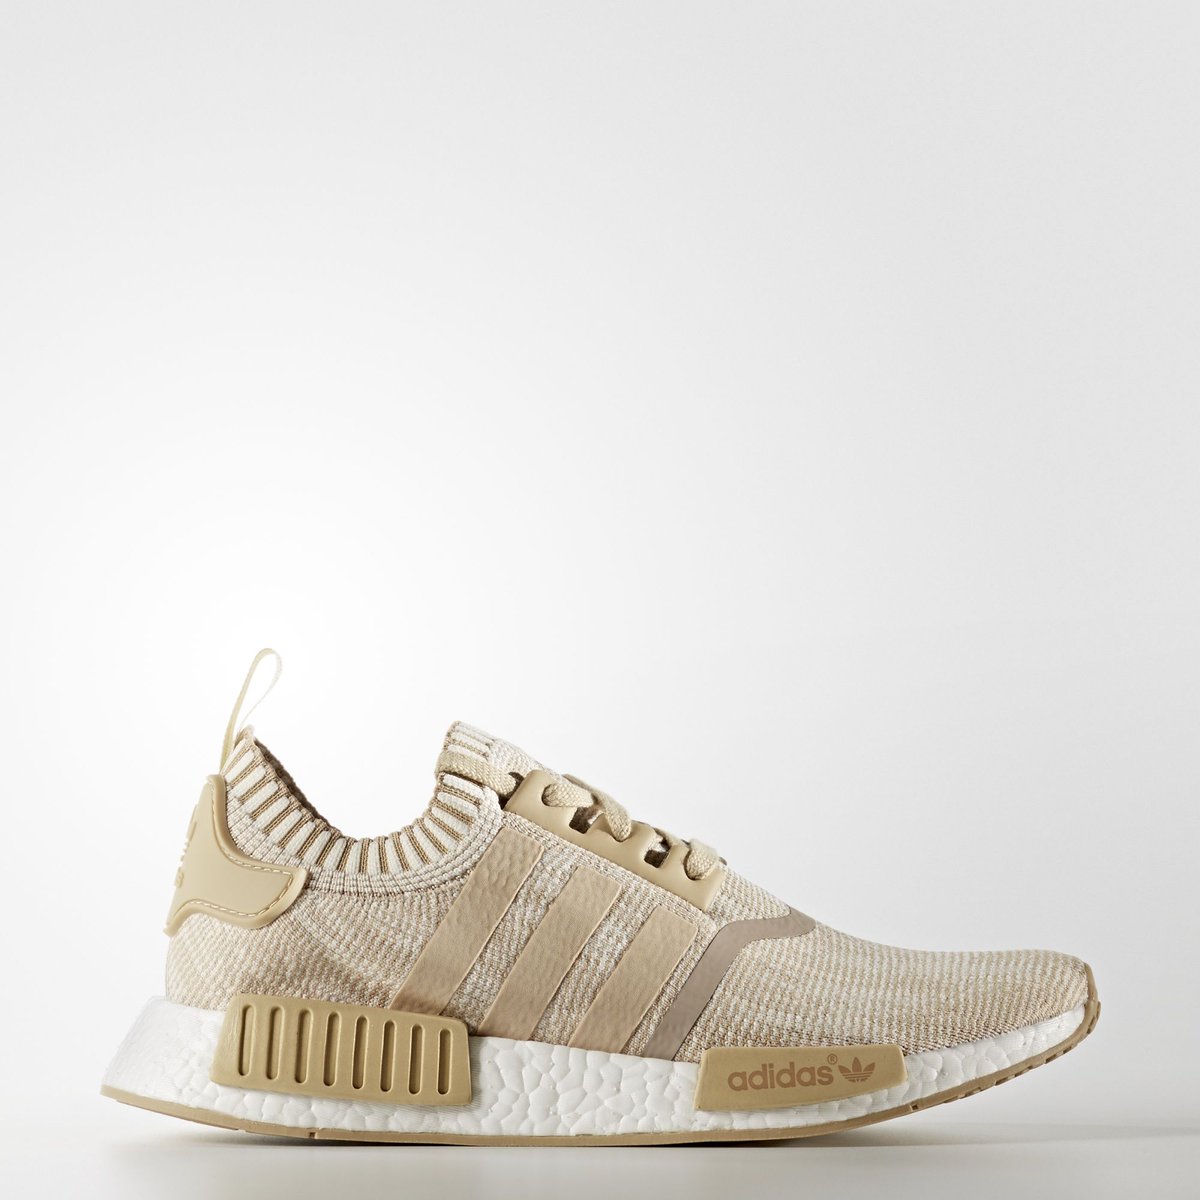 Heated Sneaks Twitter: "Adidas R1 Boost Light Khaki Brown Early 2017 Thoughts? is killing the game with these NMDs🔥 https://t.co/4m7PsIY5fu https://t.co/2dB5hcf2GK" / Twitter